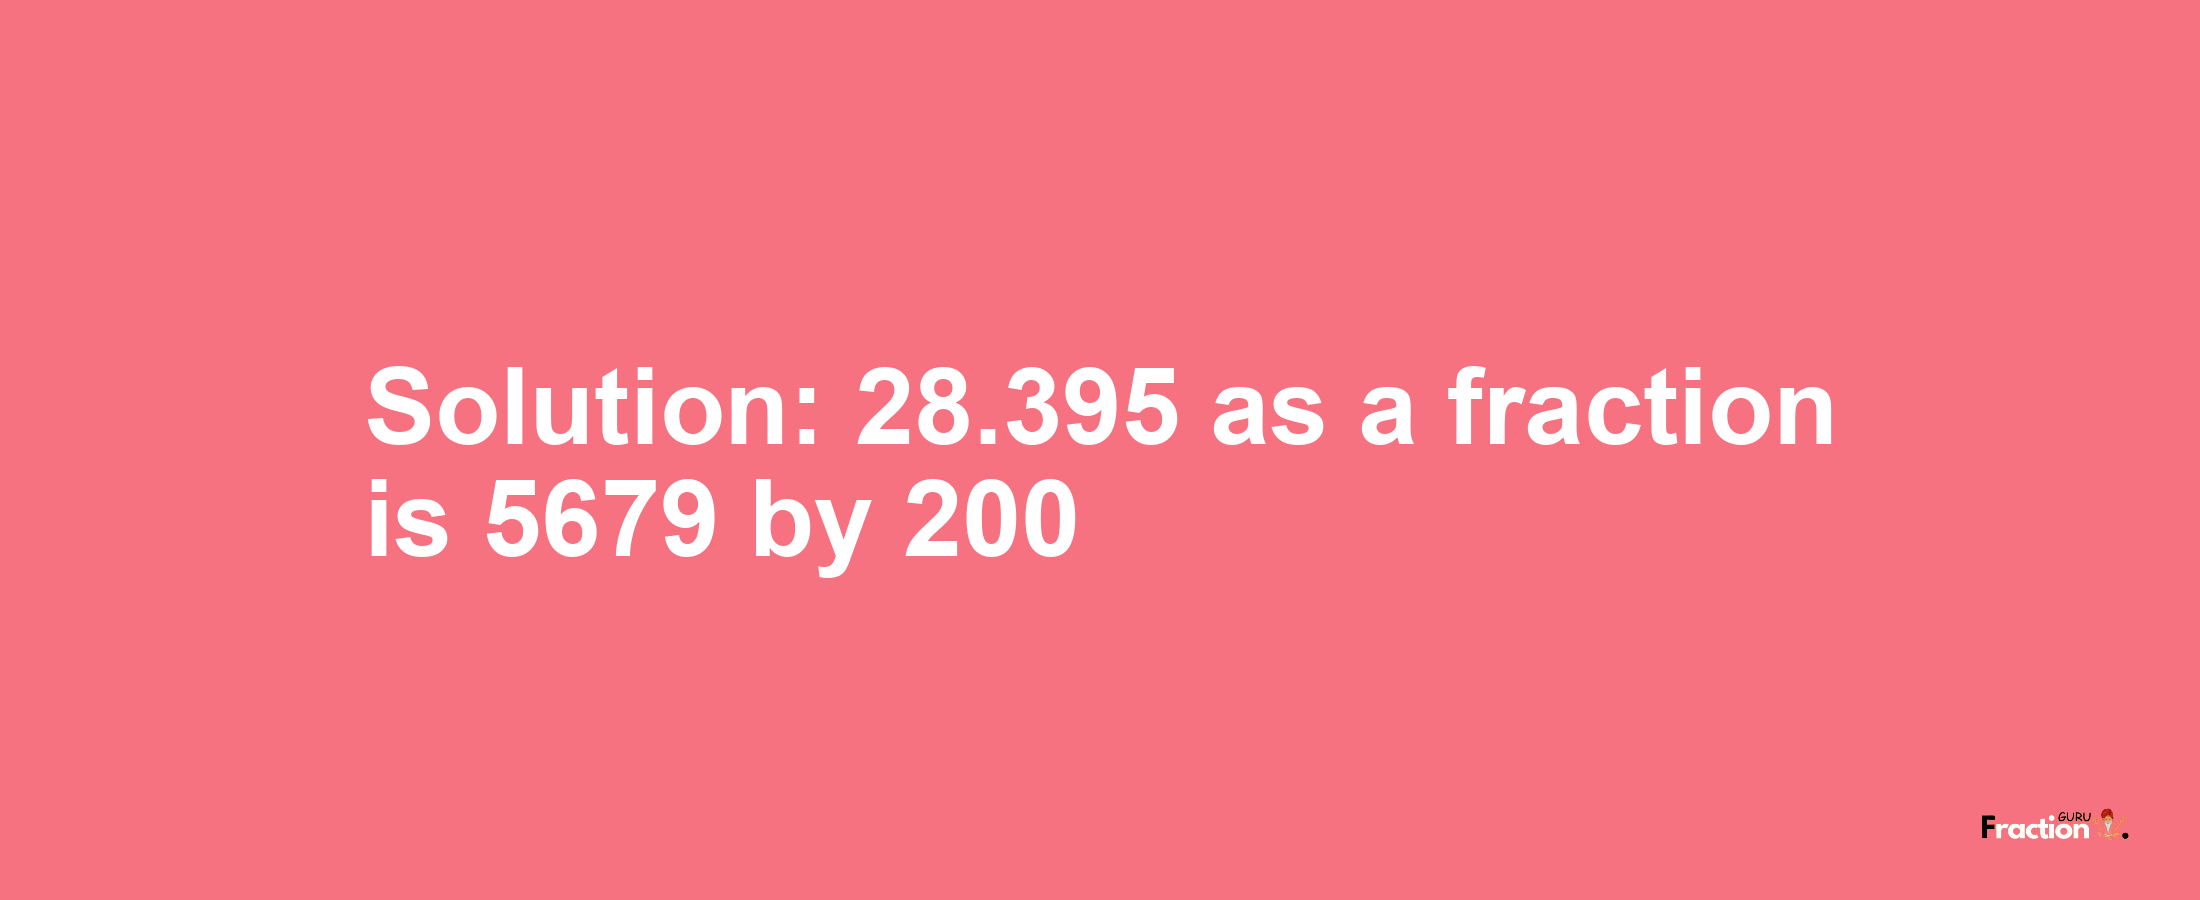 Solution:28.395 as a fraction is 5679/200